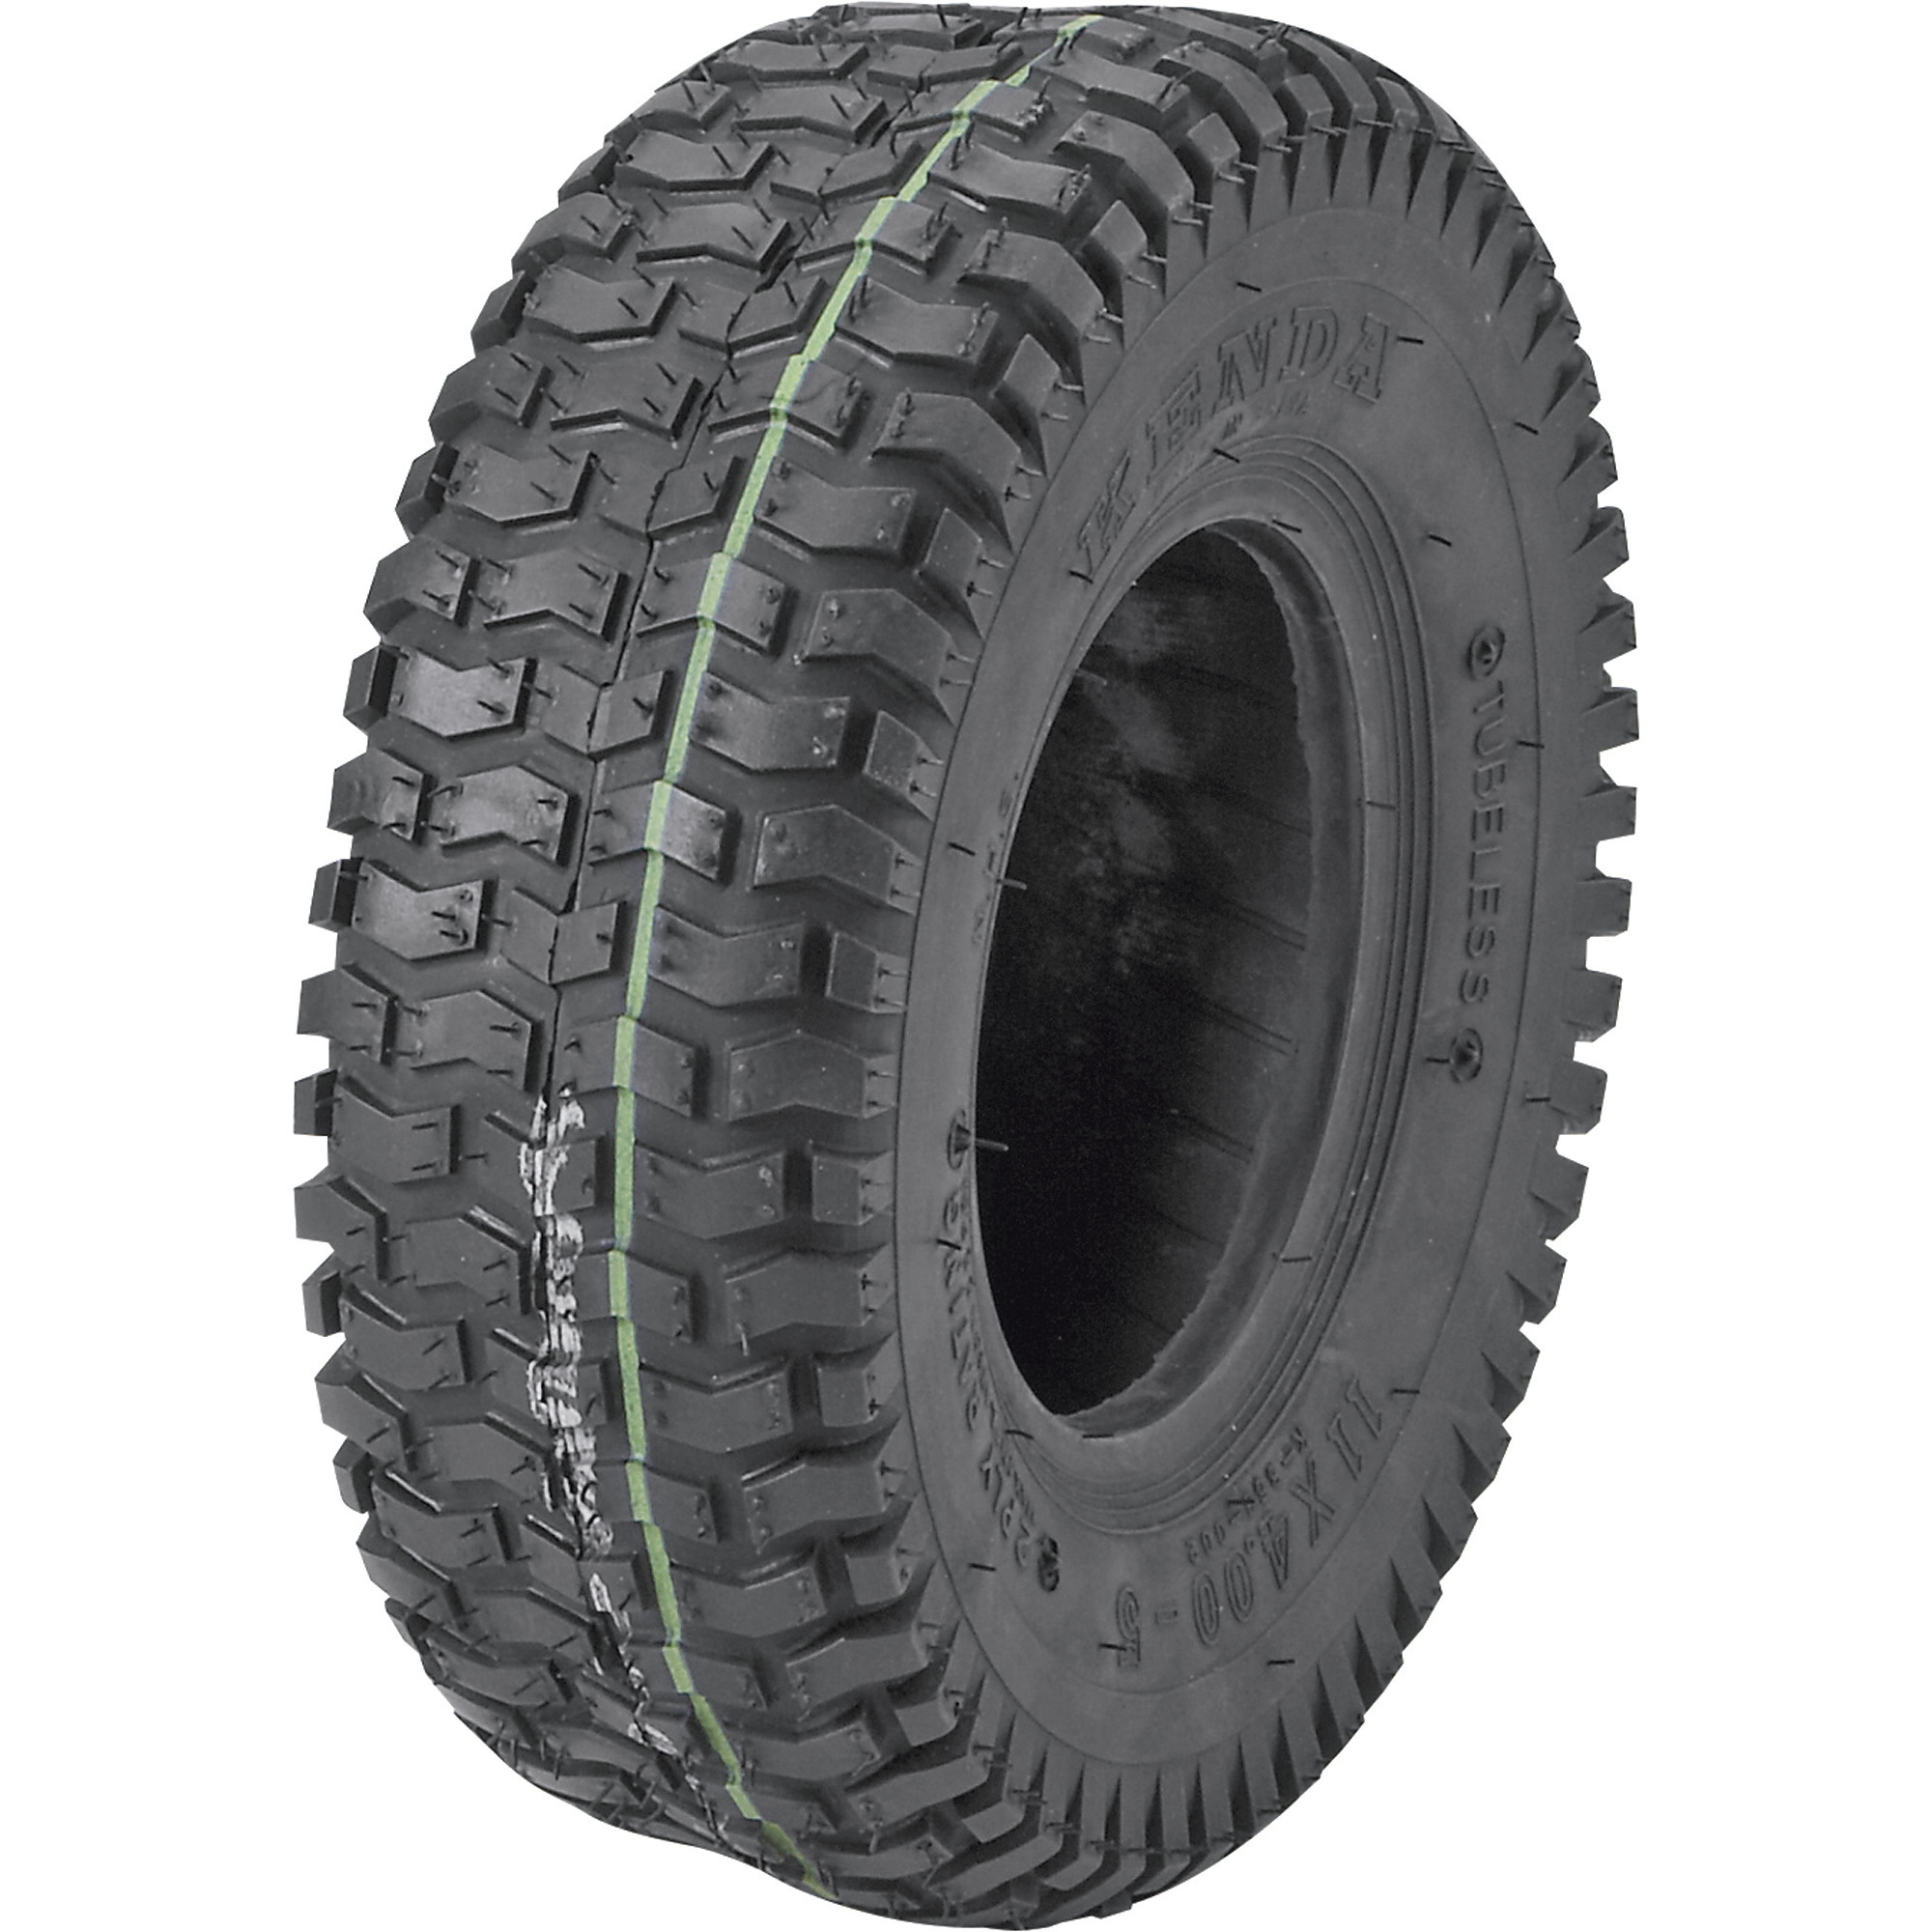 Kenda Lawn and Garden Tractor Tubeless Turf Rider Tire â 20 x 800-8